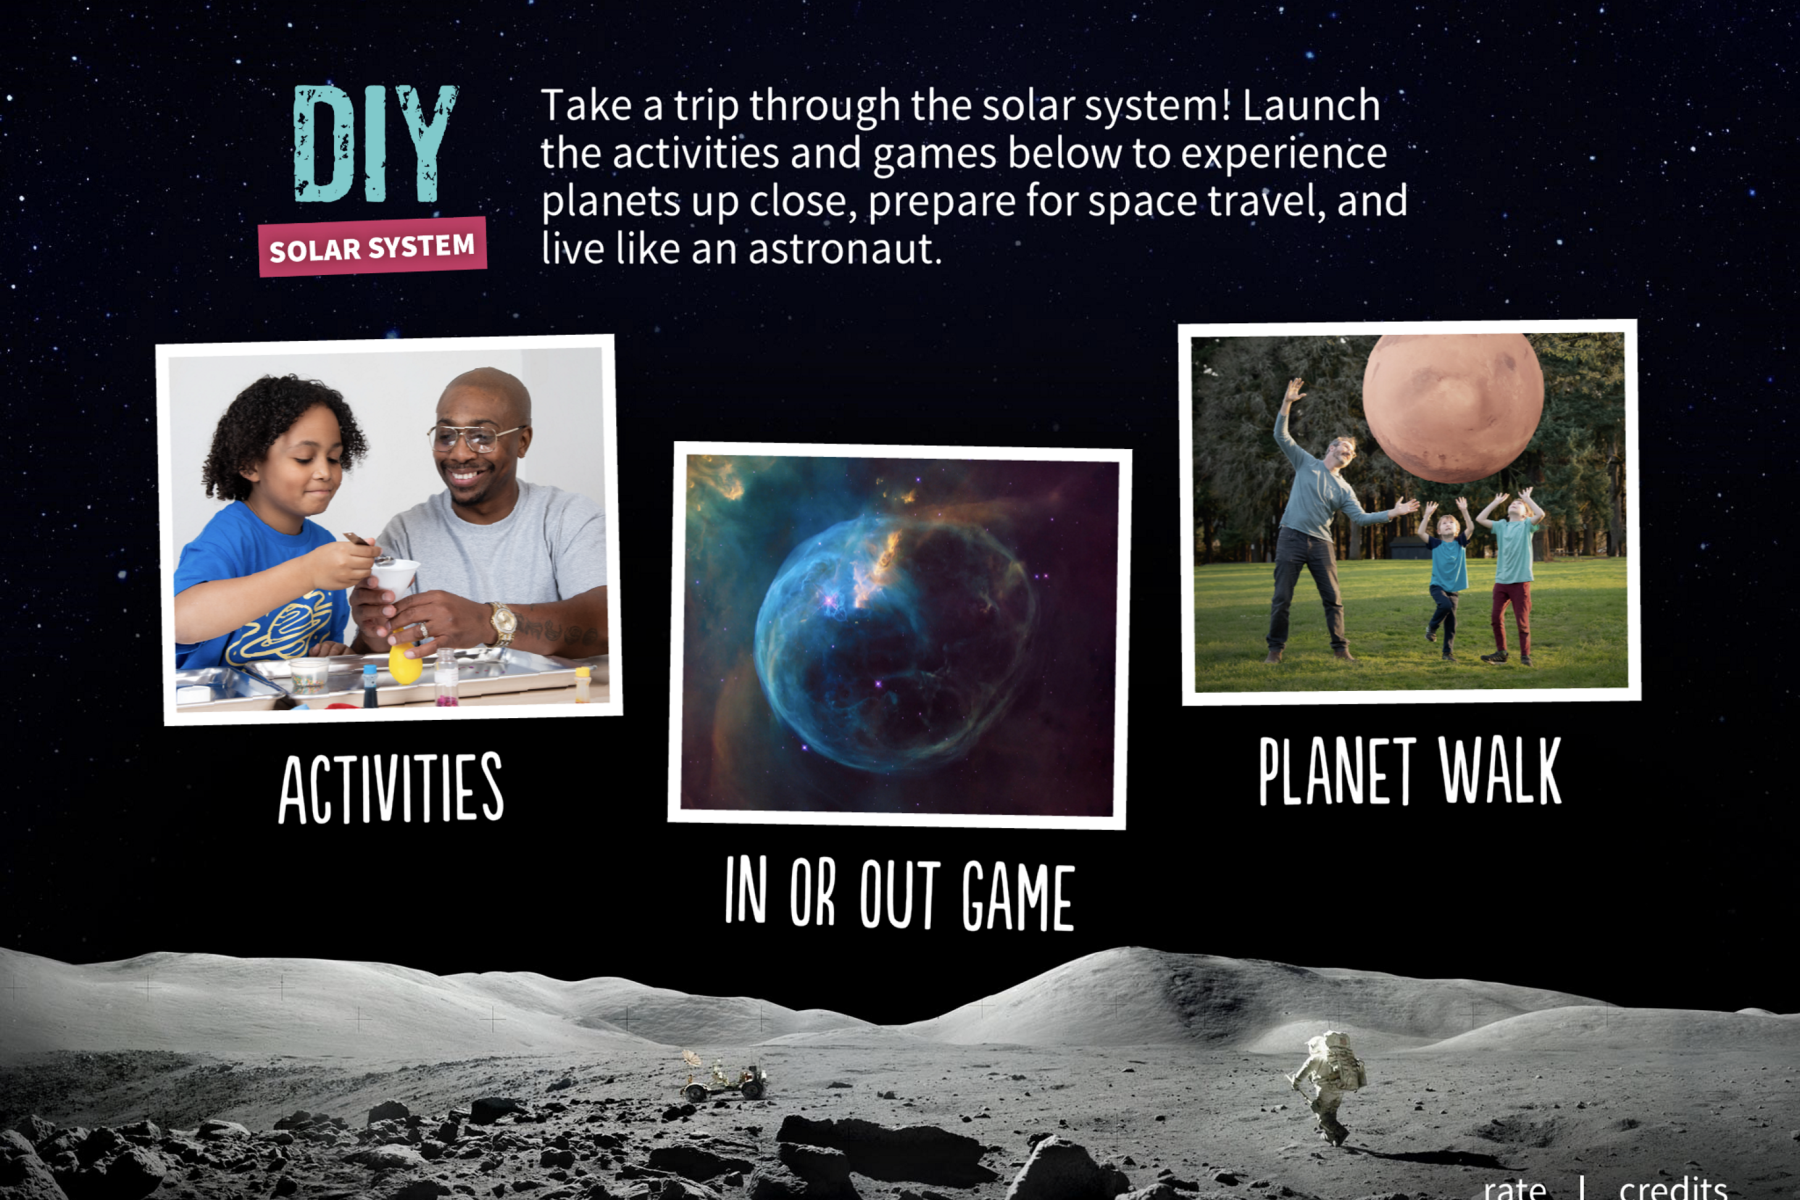 DIY Solar System app screenshot with hands-on activities, games, and a Planet Walk activity